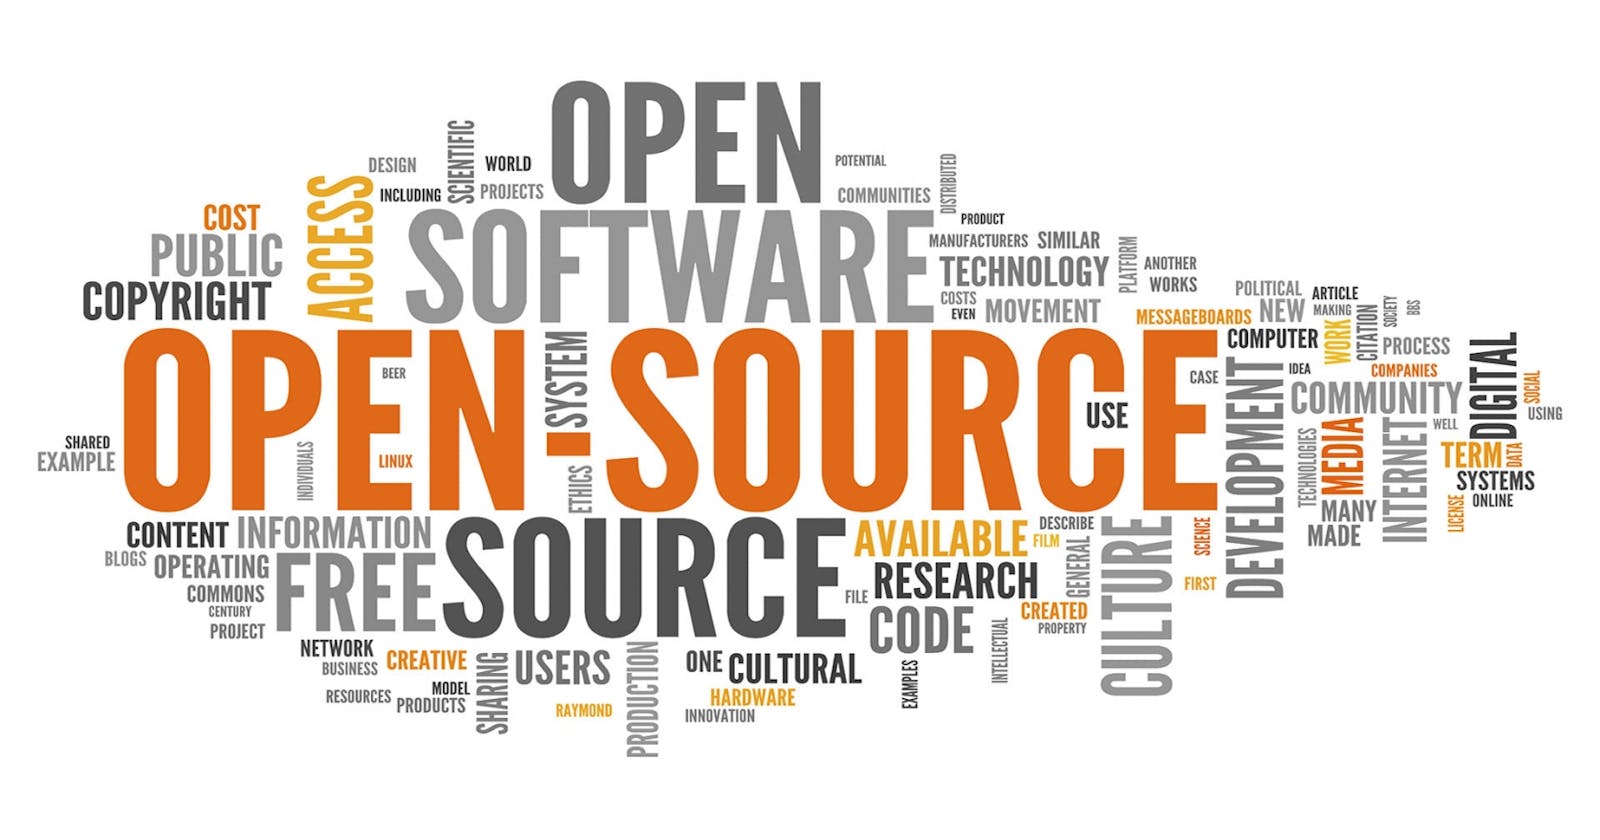 Getting Started and Making Your First Contribution #Open-Source